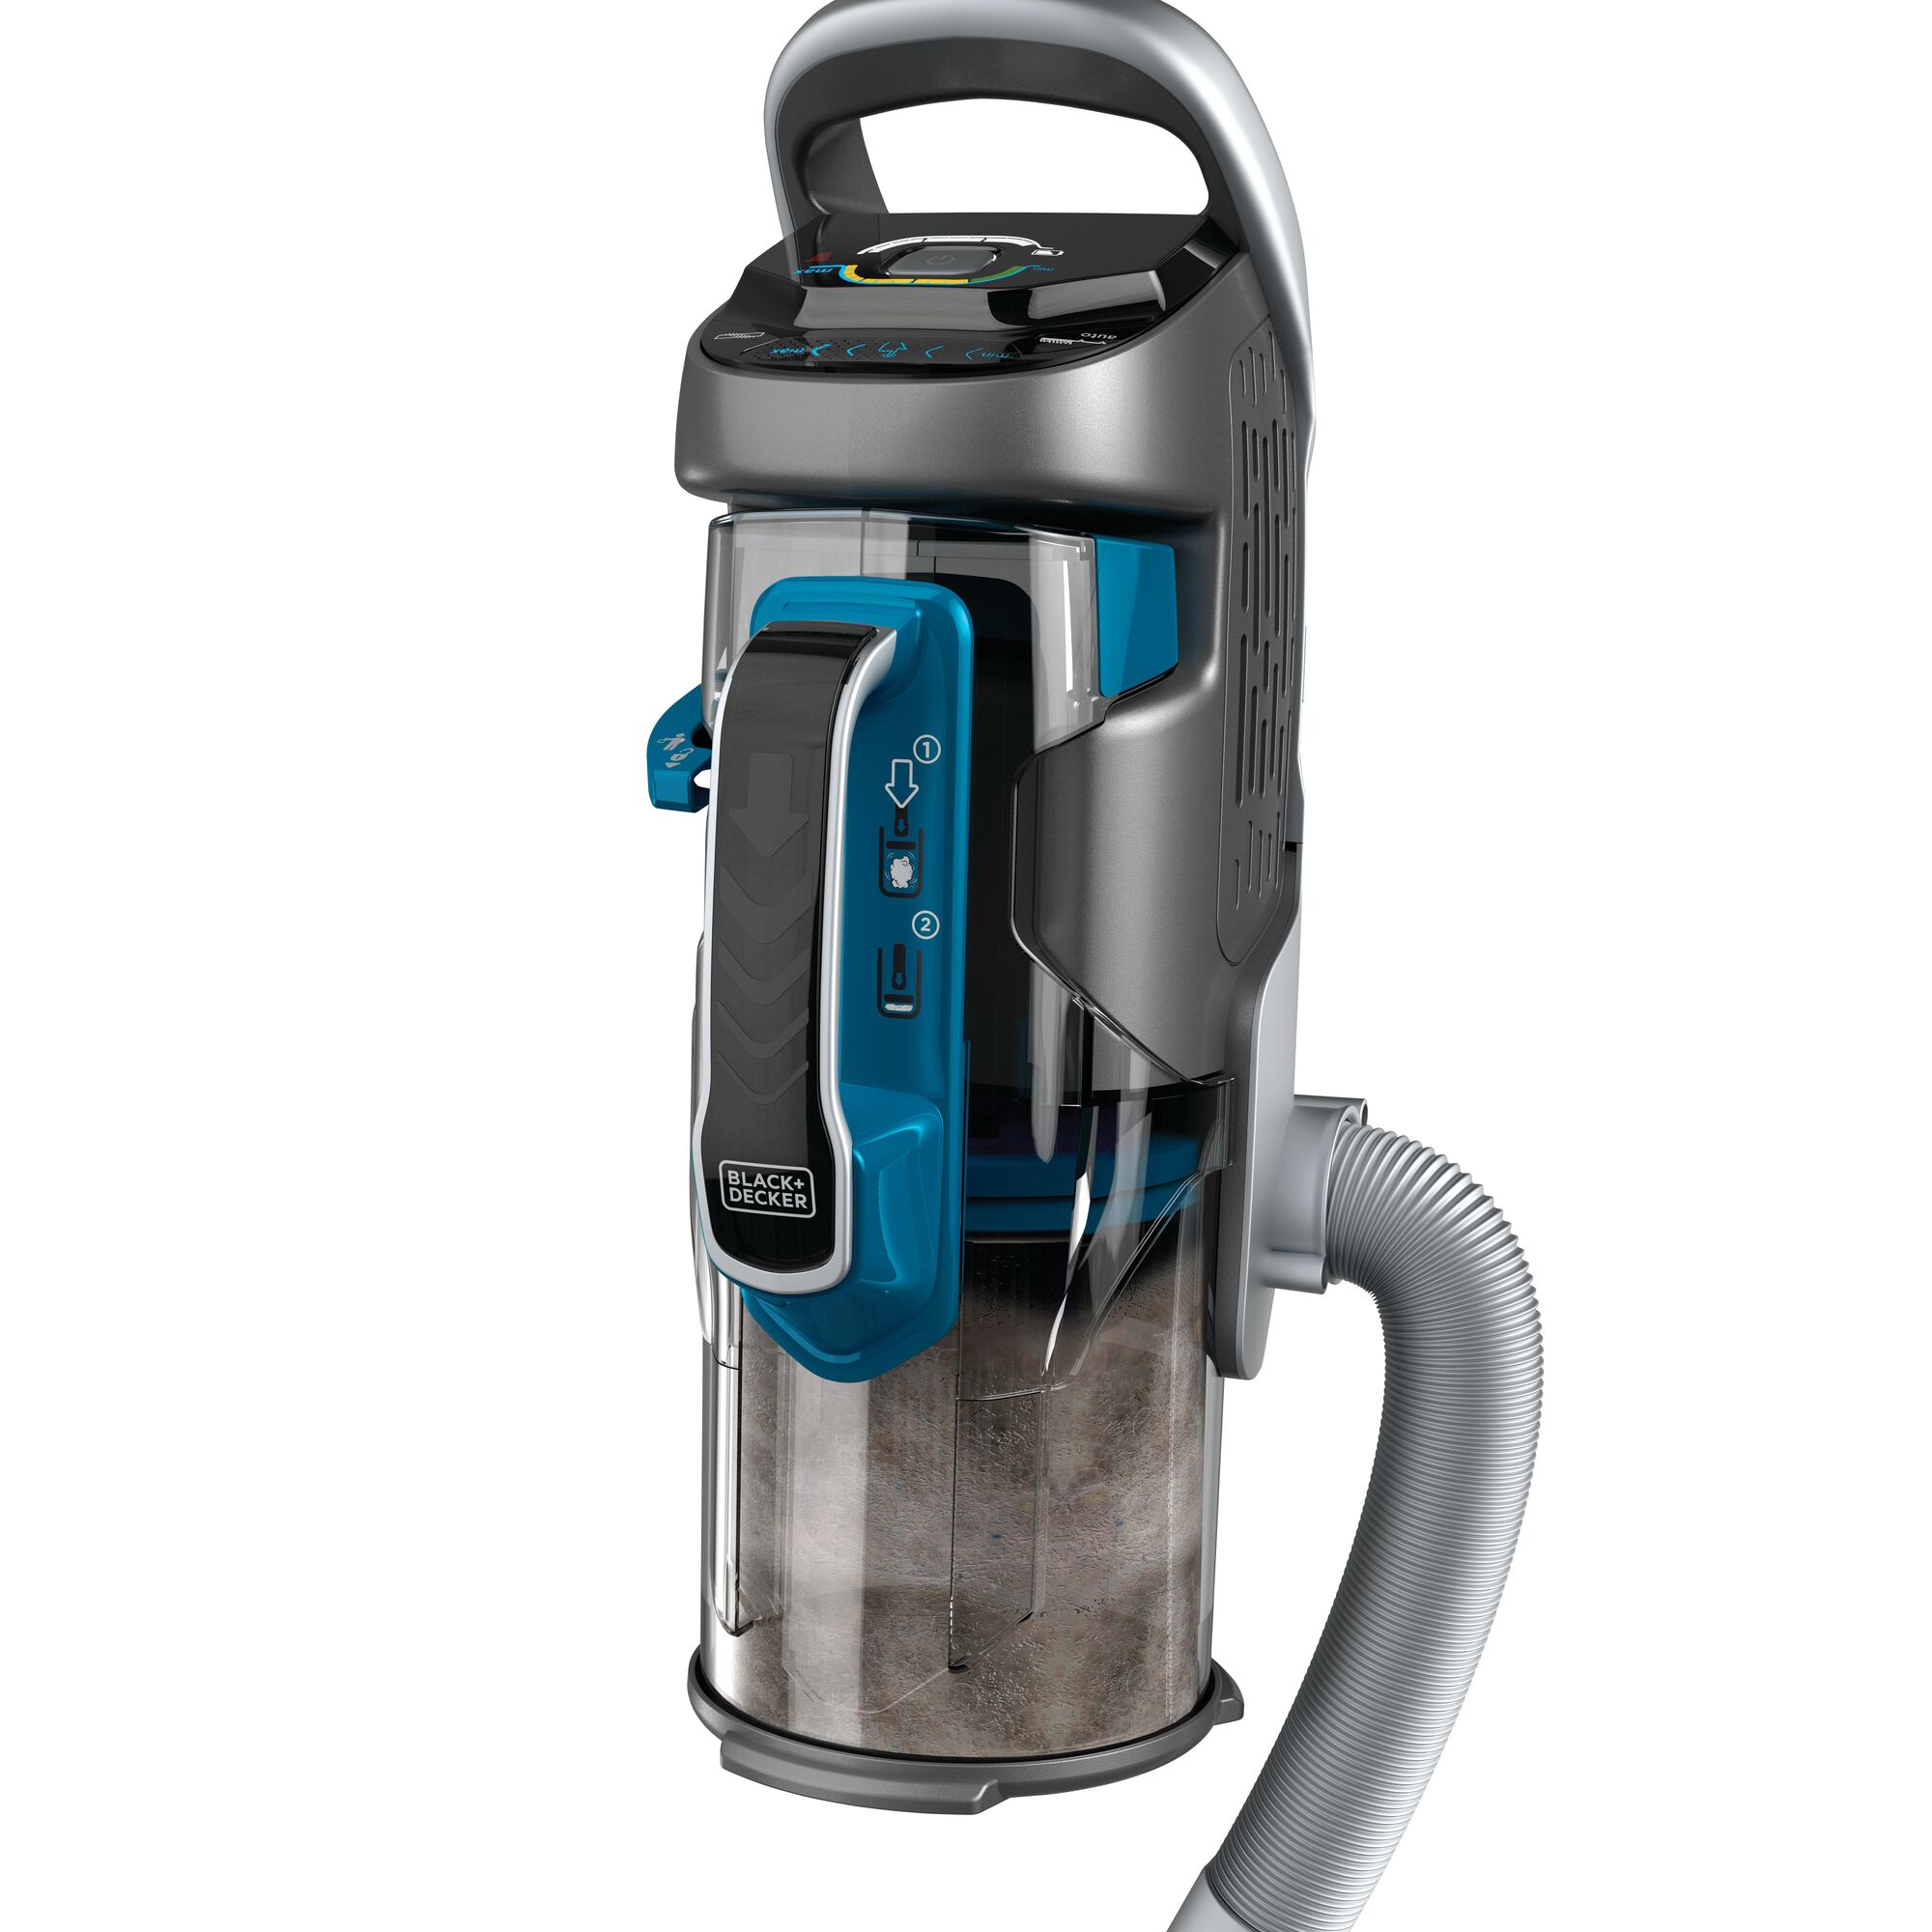 Portable canister feature of POWER SERIES PRO cordless 2 in 1 vacuum.